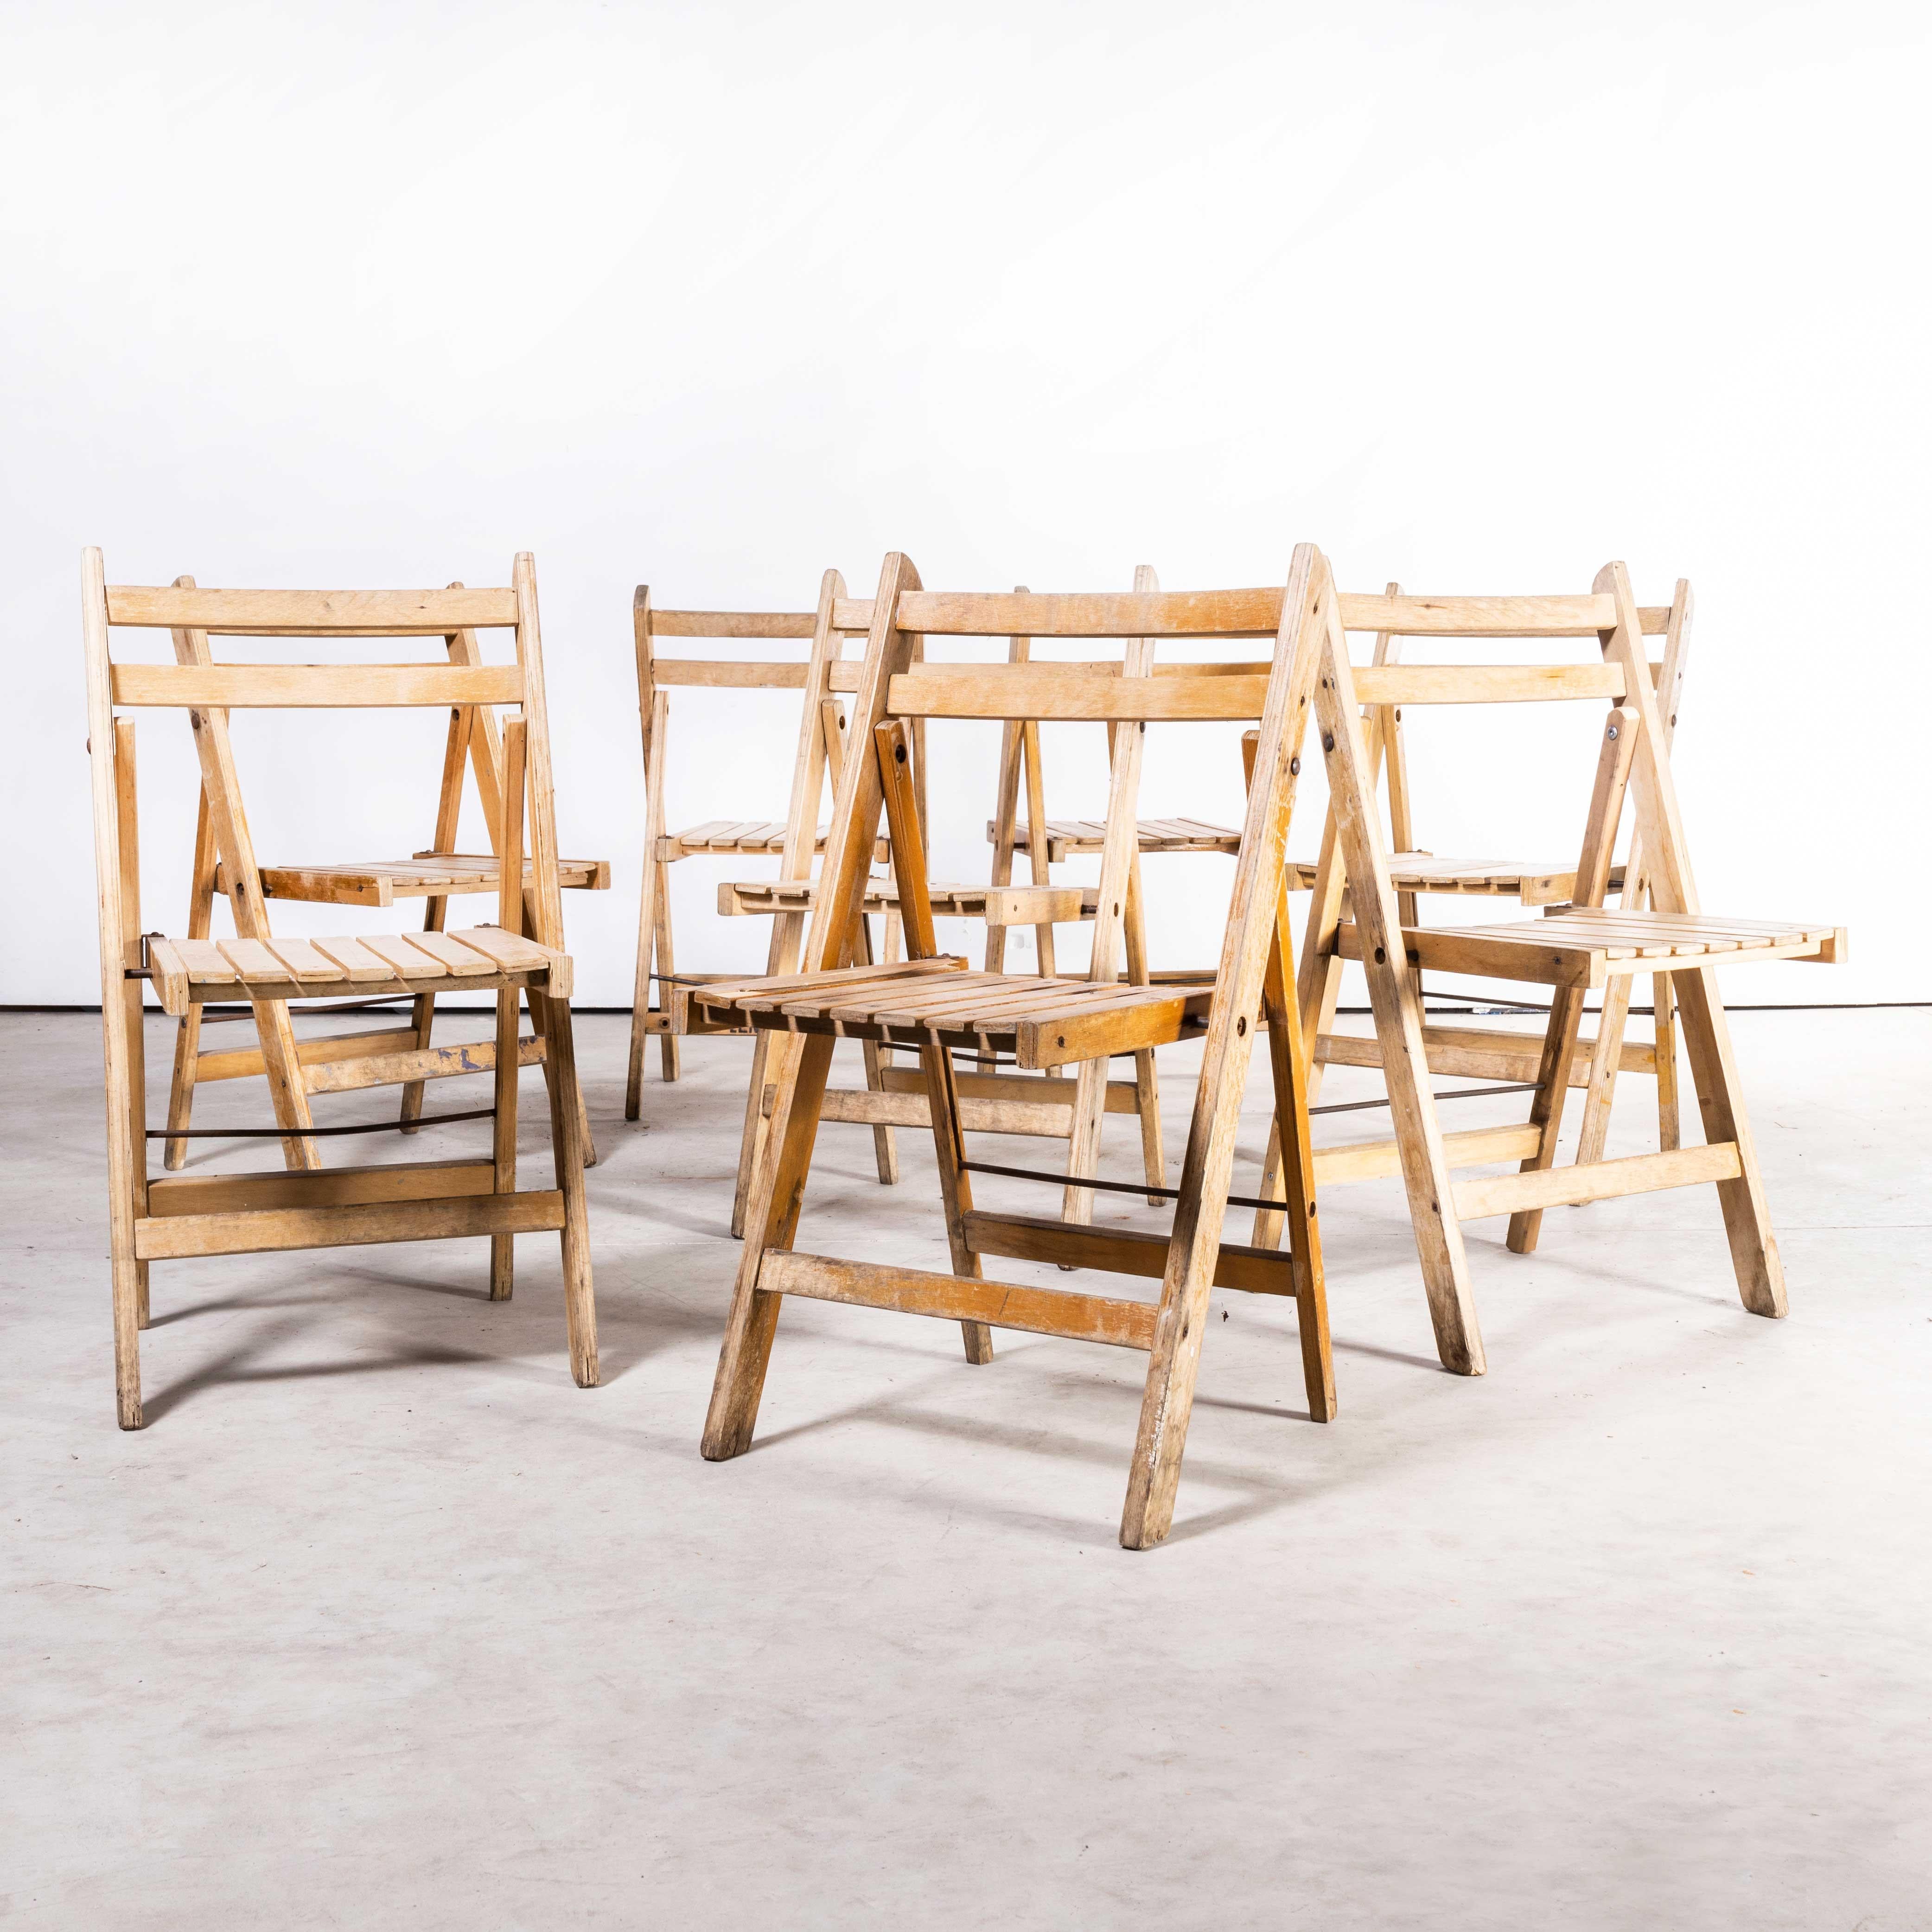 1960’s beech folding chairs – set of eight (model 2179).
1960’s beech folding chairs – set of eight (model 2179). Good practical classic folding chairs originally made in Germany of solid beech. Every chair passes through our workshops where they